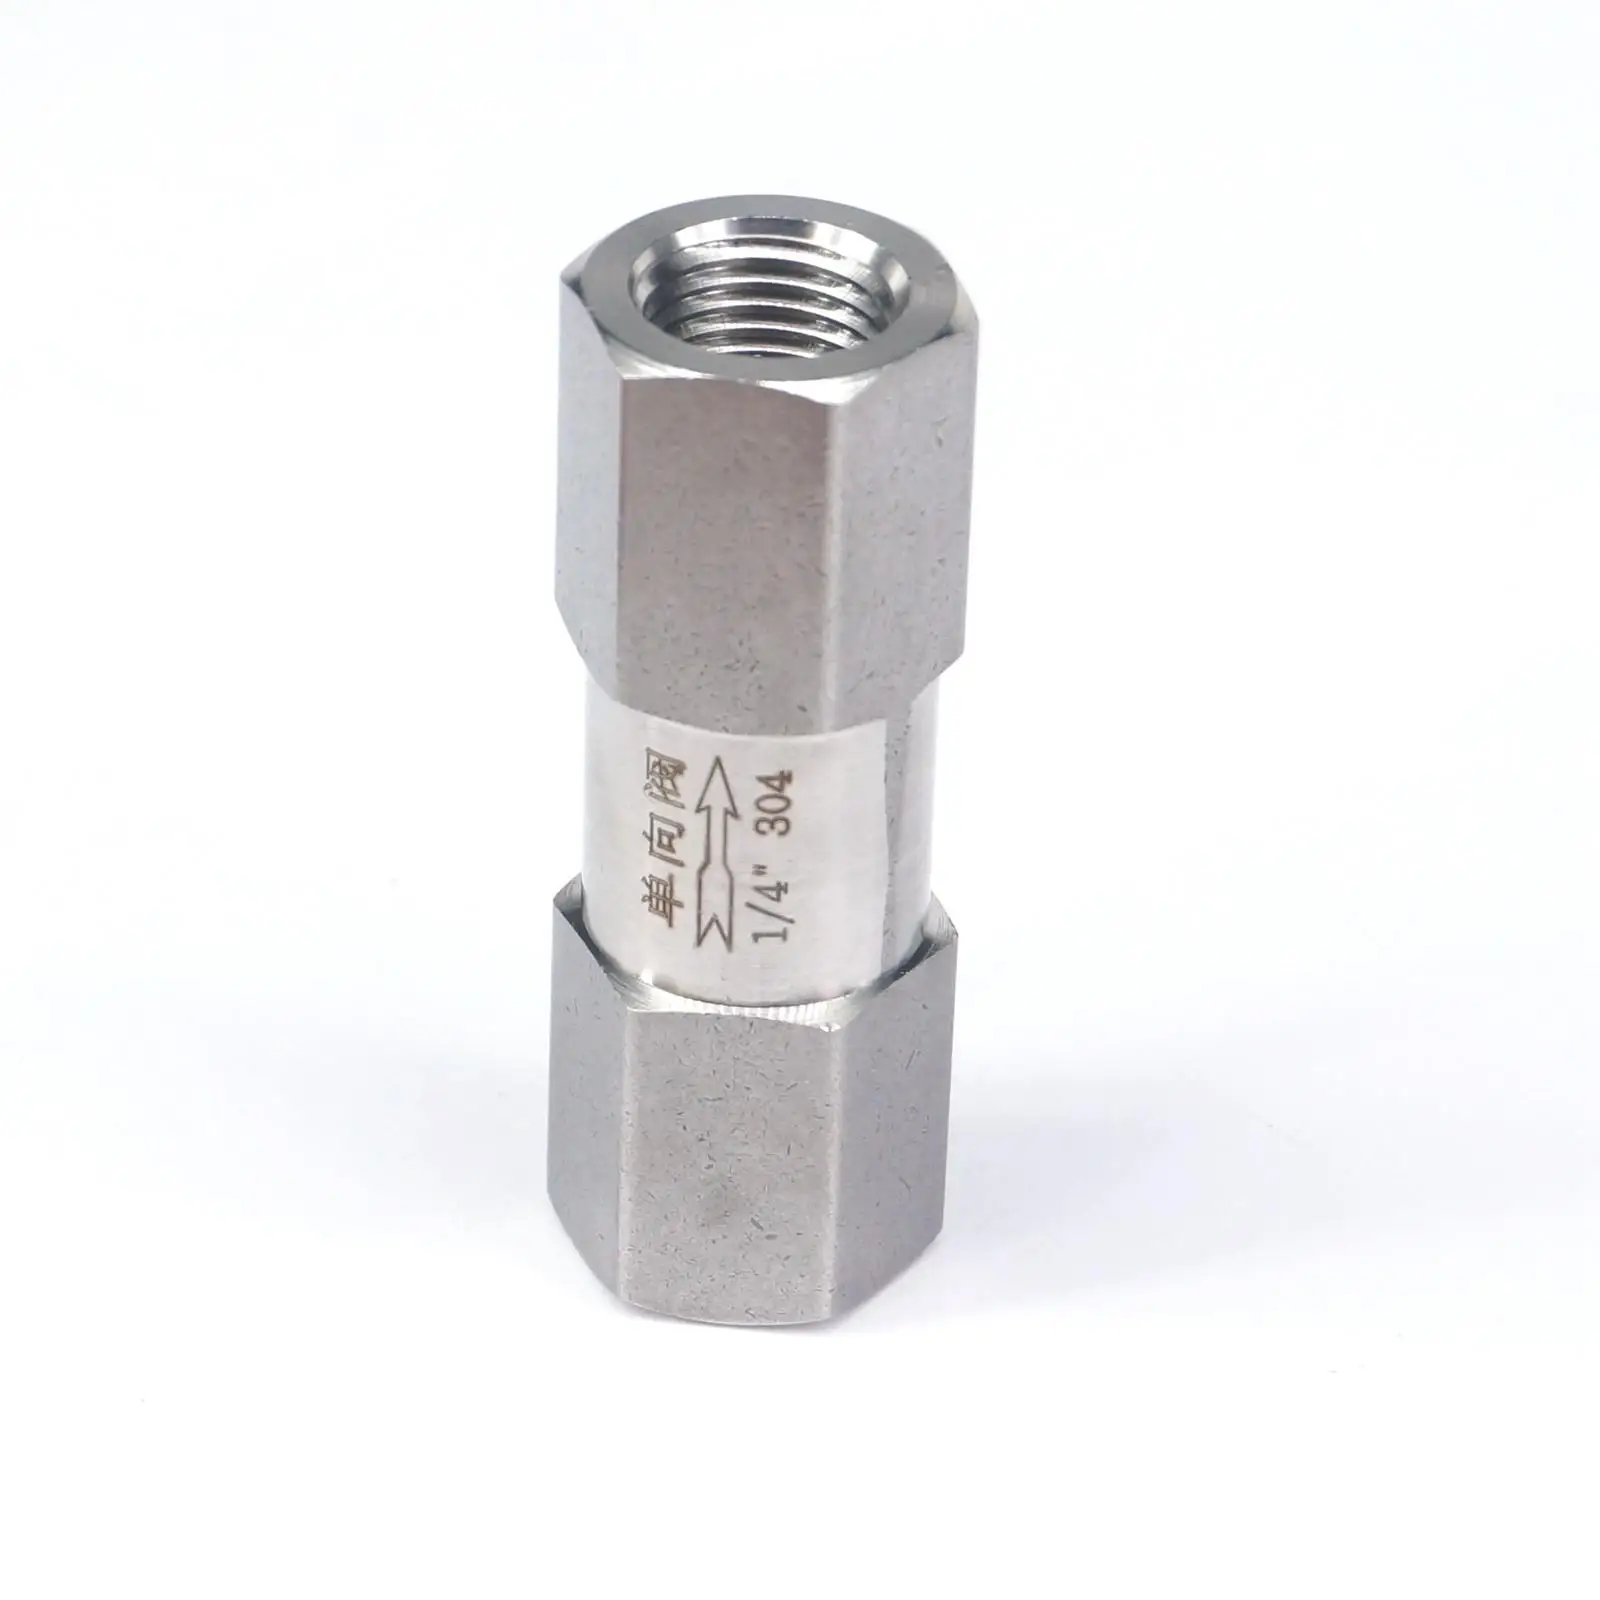 Color : Silver, Size : 1 1/4 FYTLKJ Stainless Steel Wire Mouth Horizontal Non-Return Valve 304 Stainless Steel Female Thread Swing Check Valve